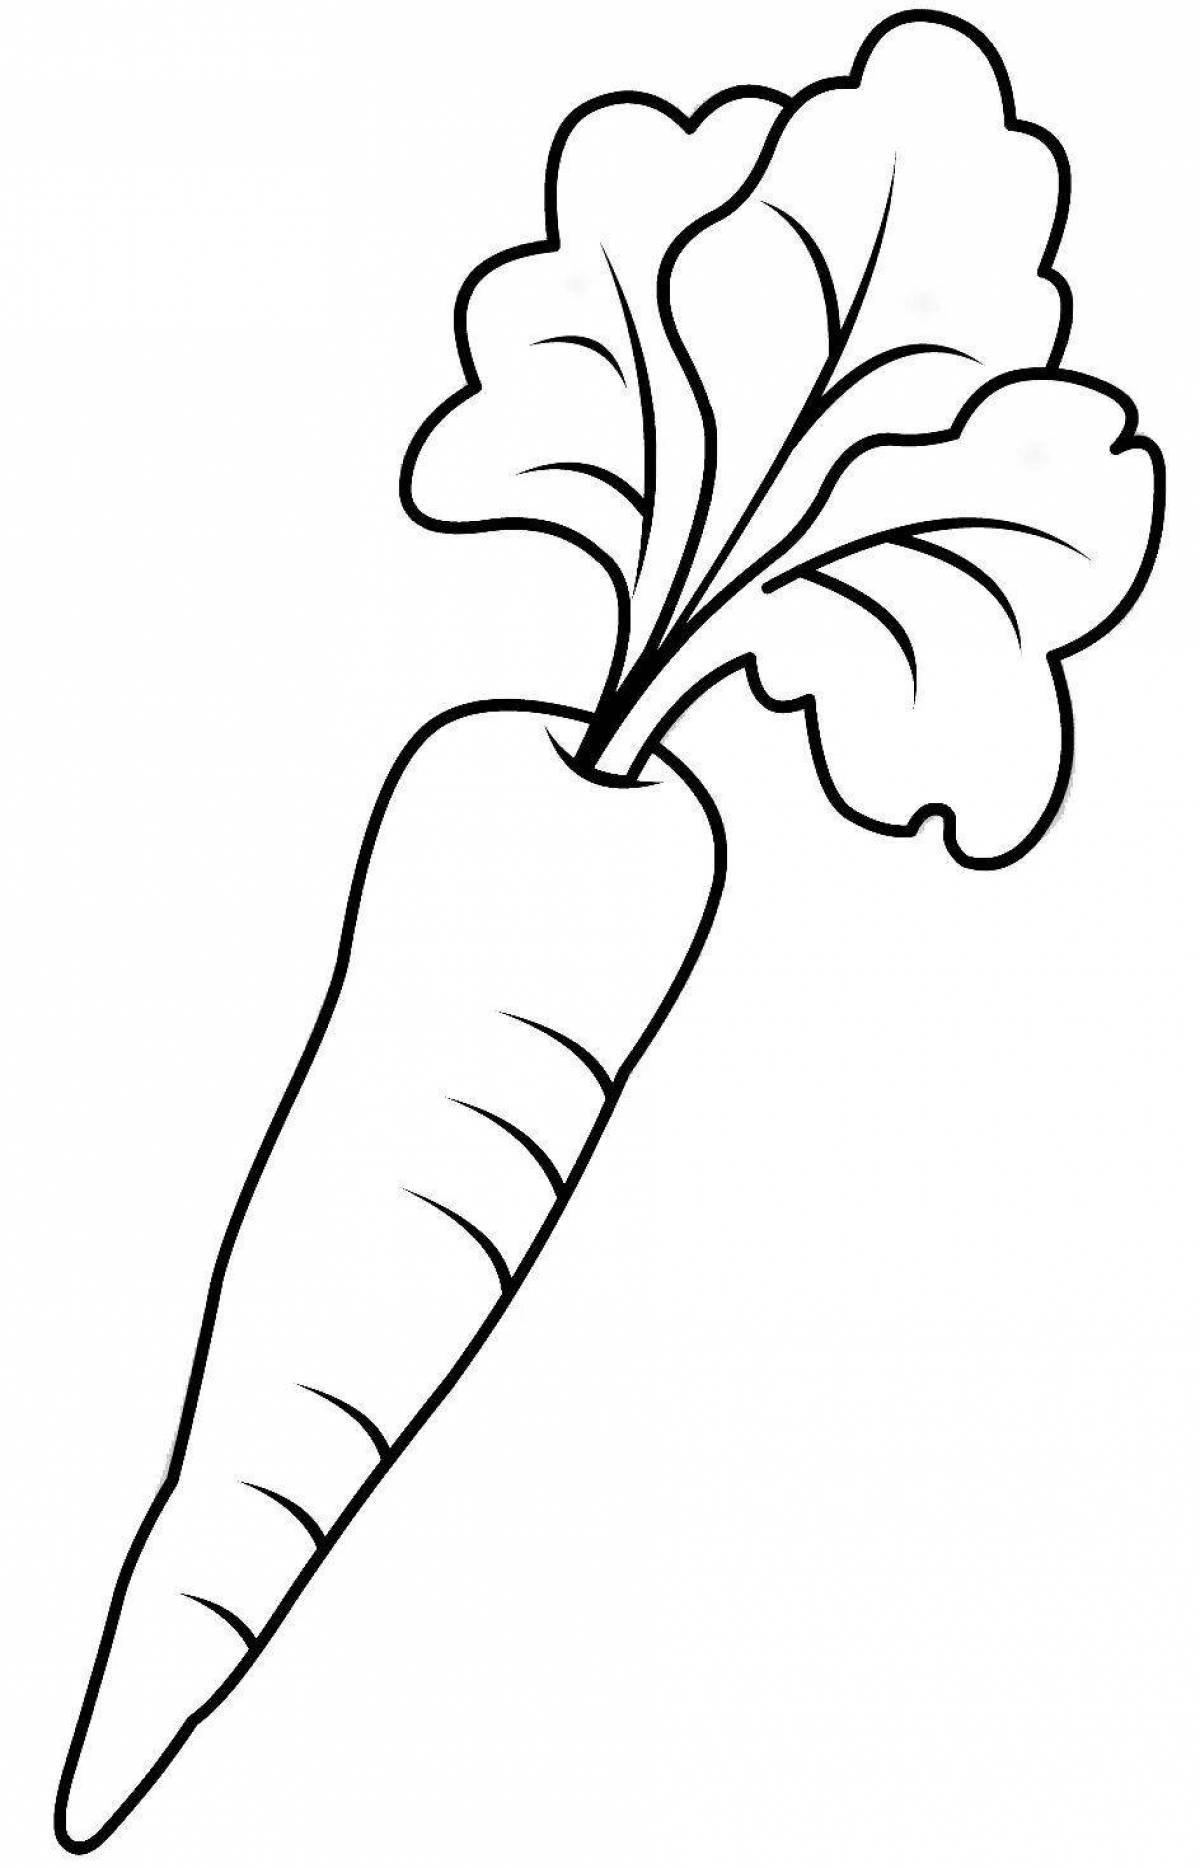 Attractive carrot coloring book